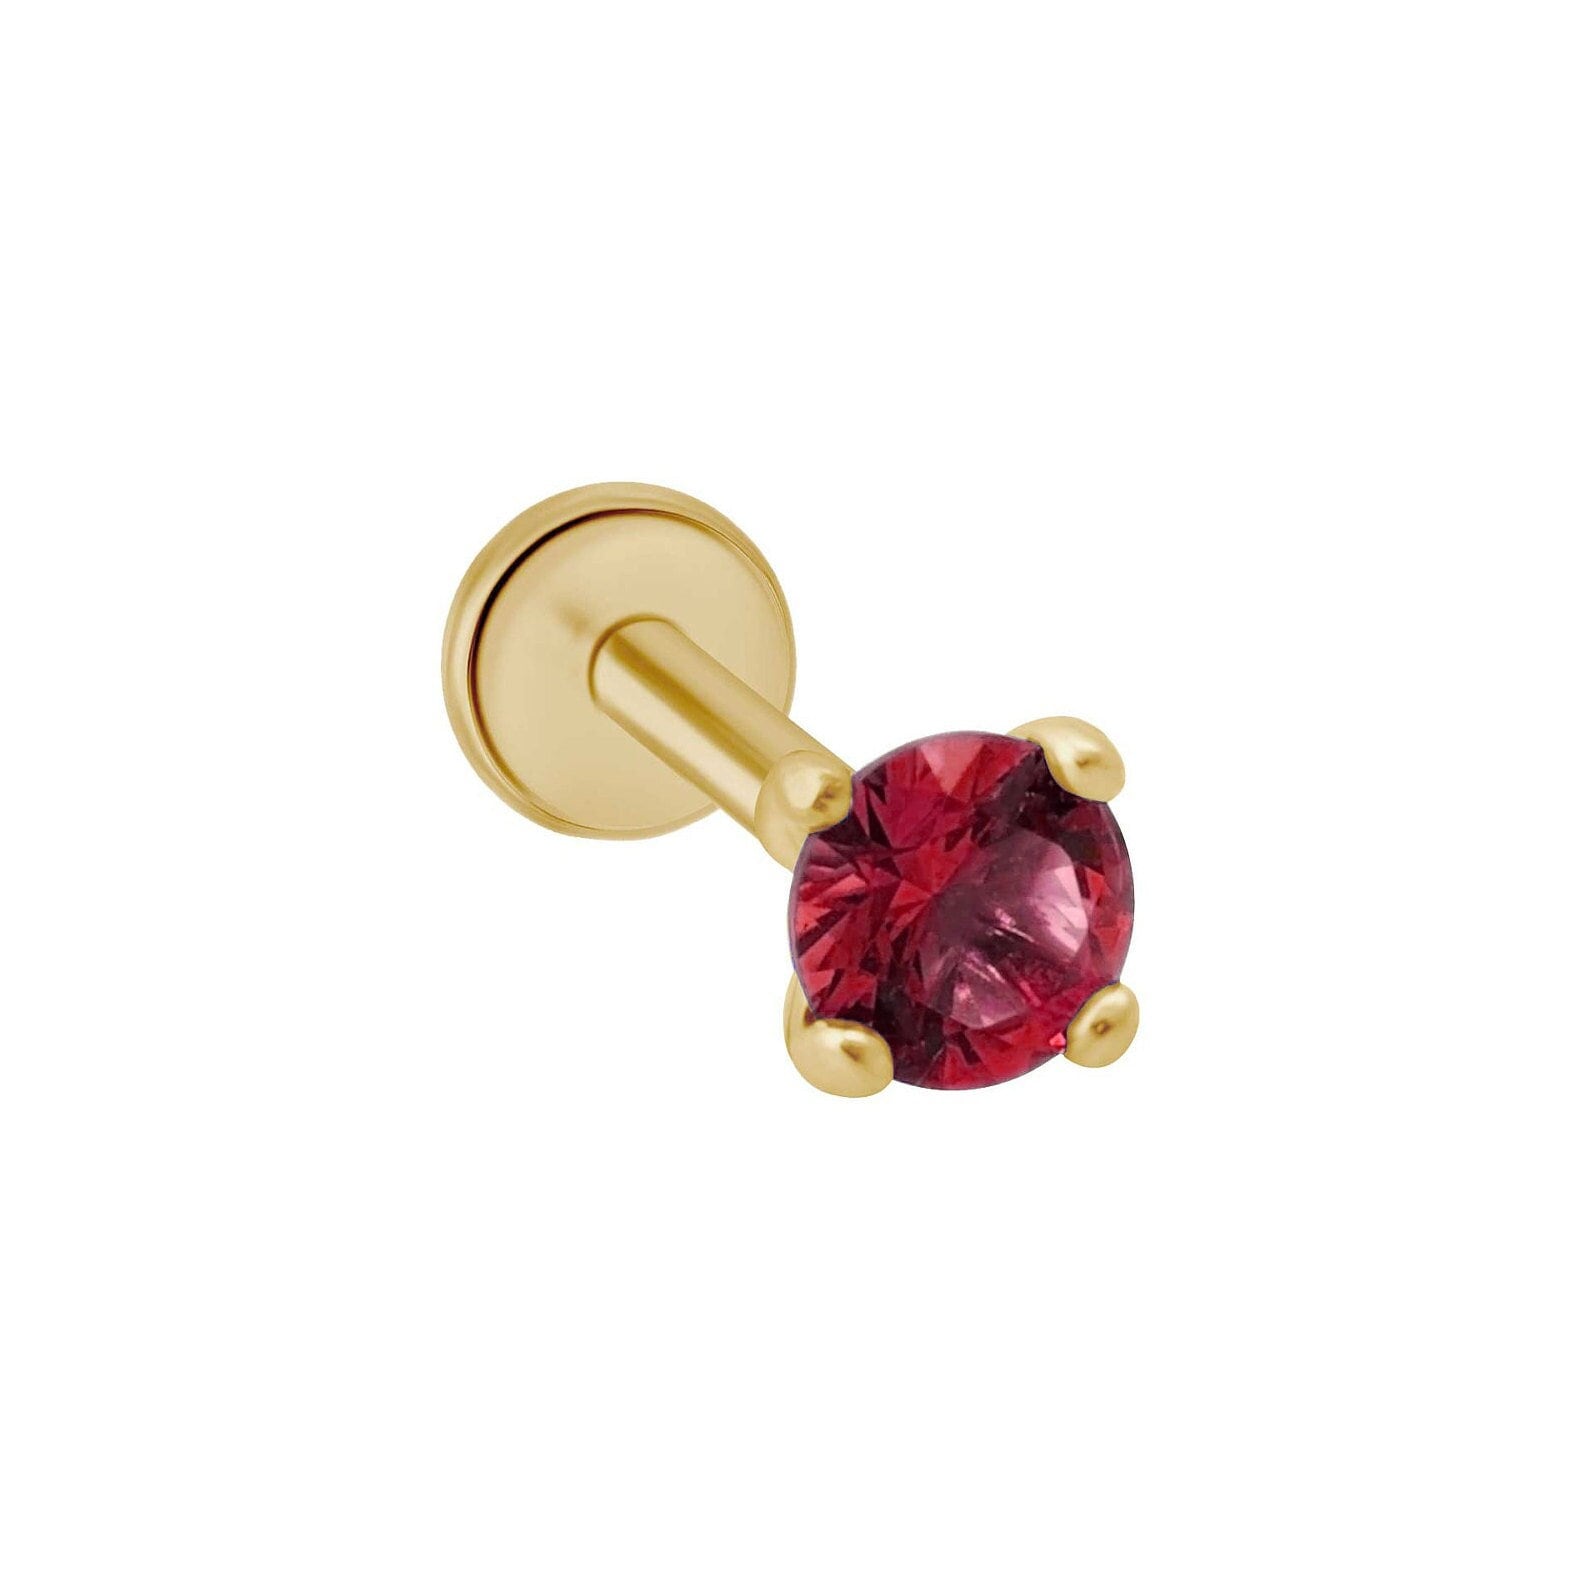 Ruby Cartilage Flat Back Earring Earrings Estella Collection #product_description# 18290 14k Birthstone Earrings birthstone jewelry #tag4# #tag5# #tag6# #tag7# #tag8# #tag9# #tag10# 2.5mm 5MM